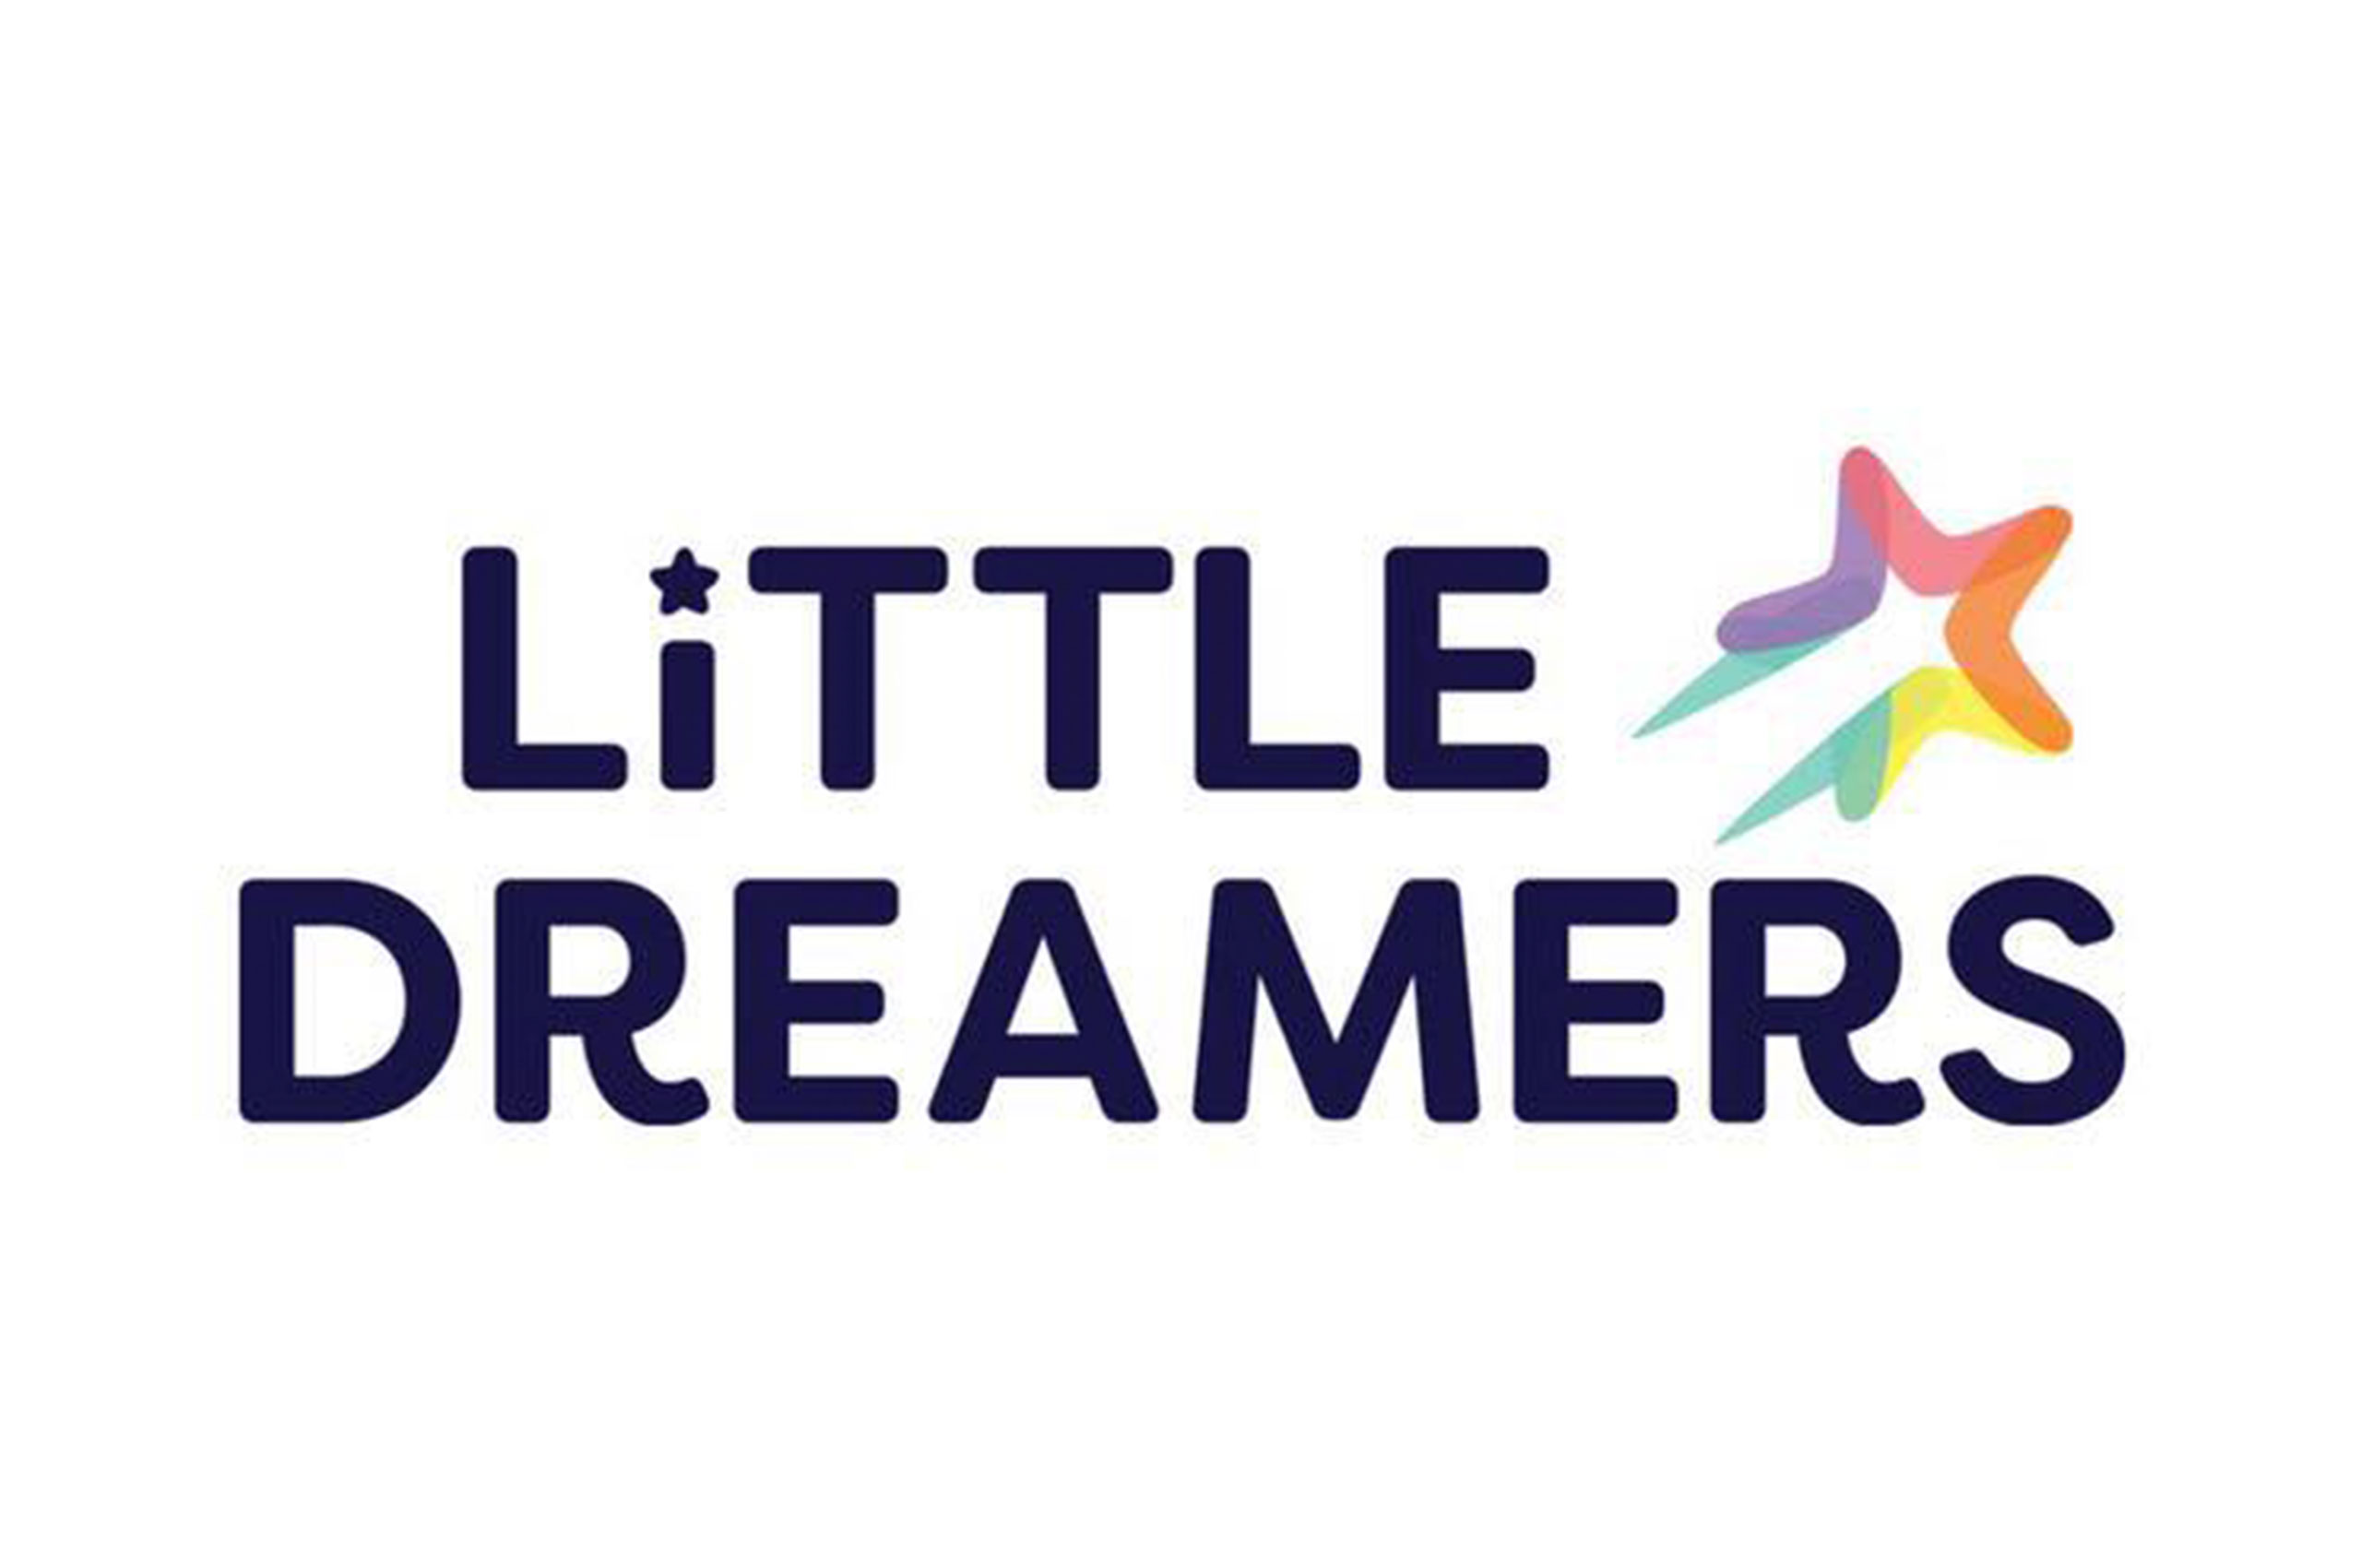 Little Dreamers with stylised star